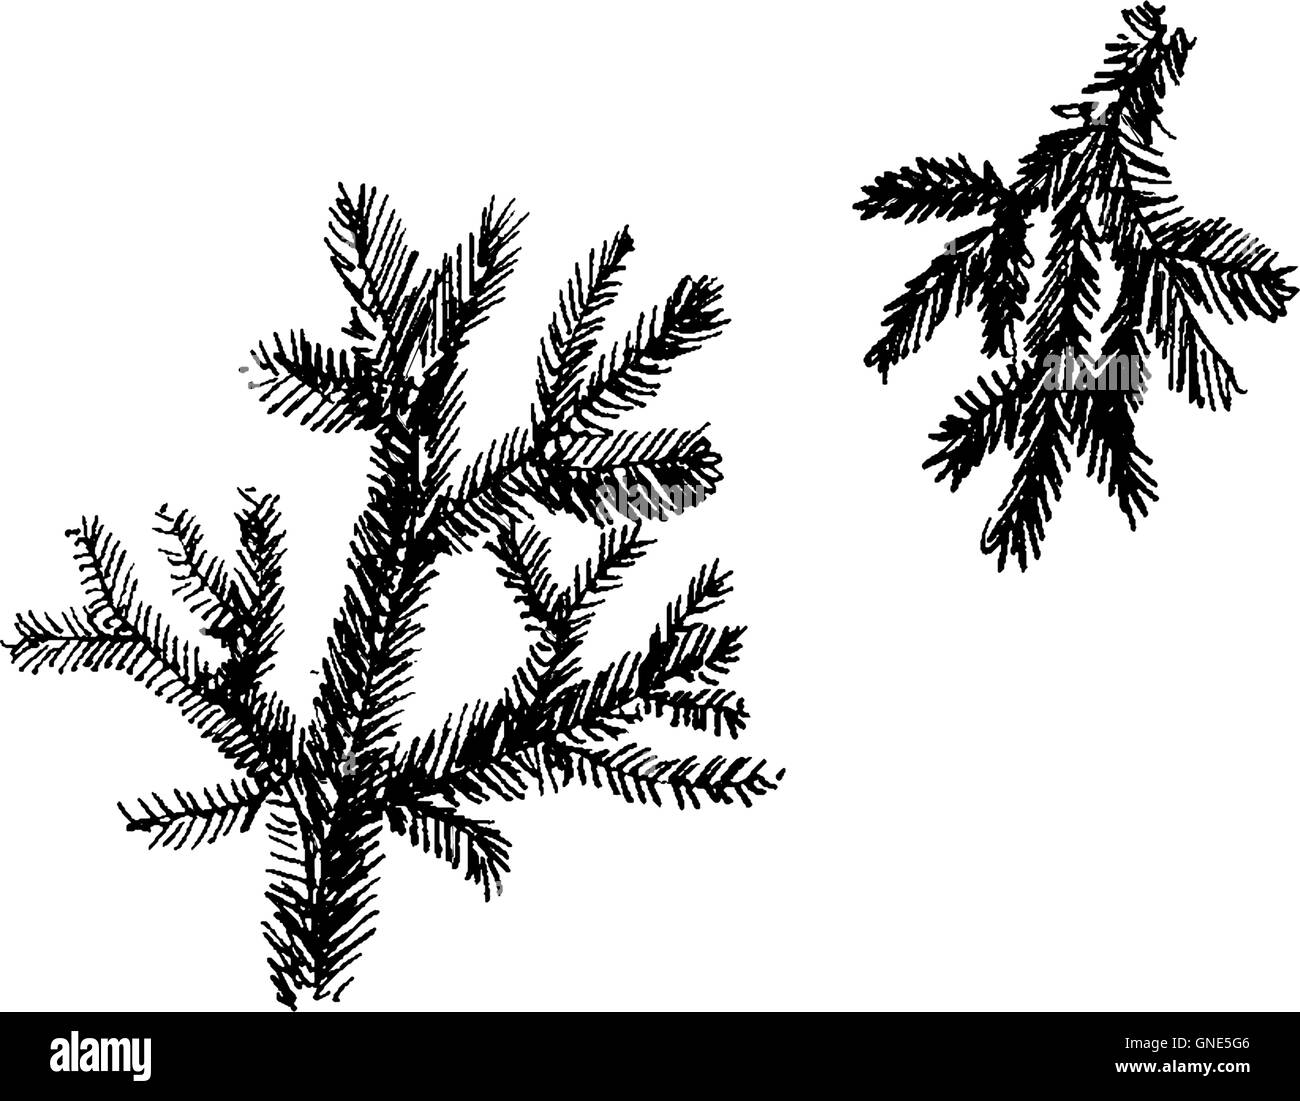 Needles green background Black and White Stock Photos & Images - Alamy